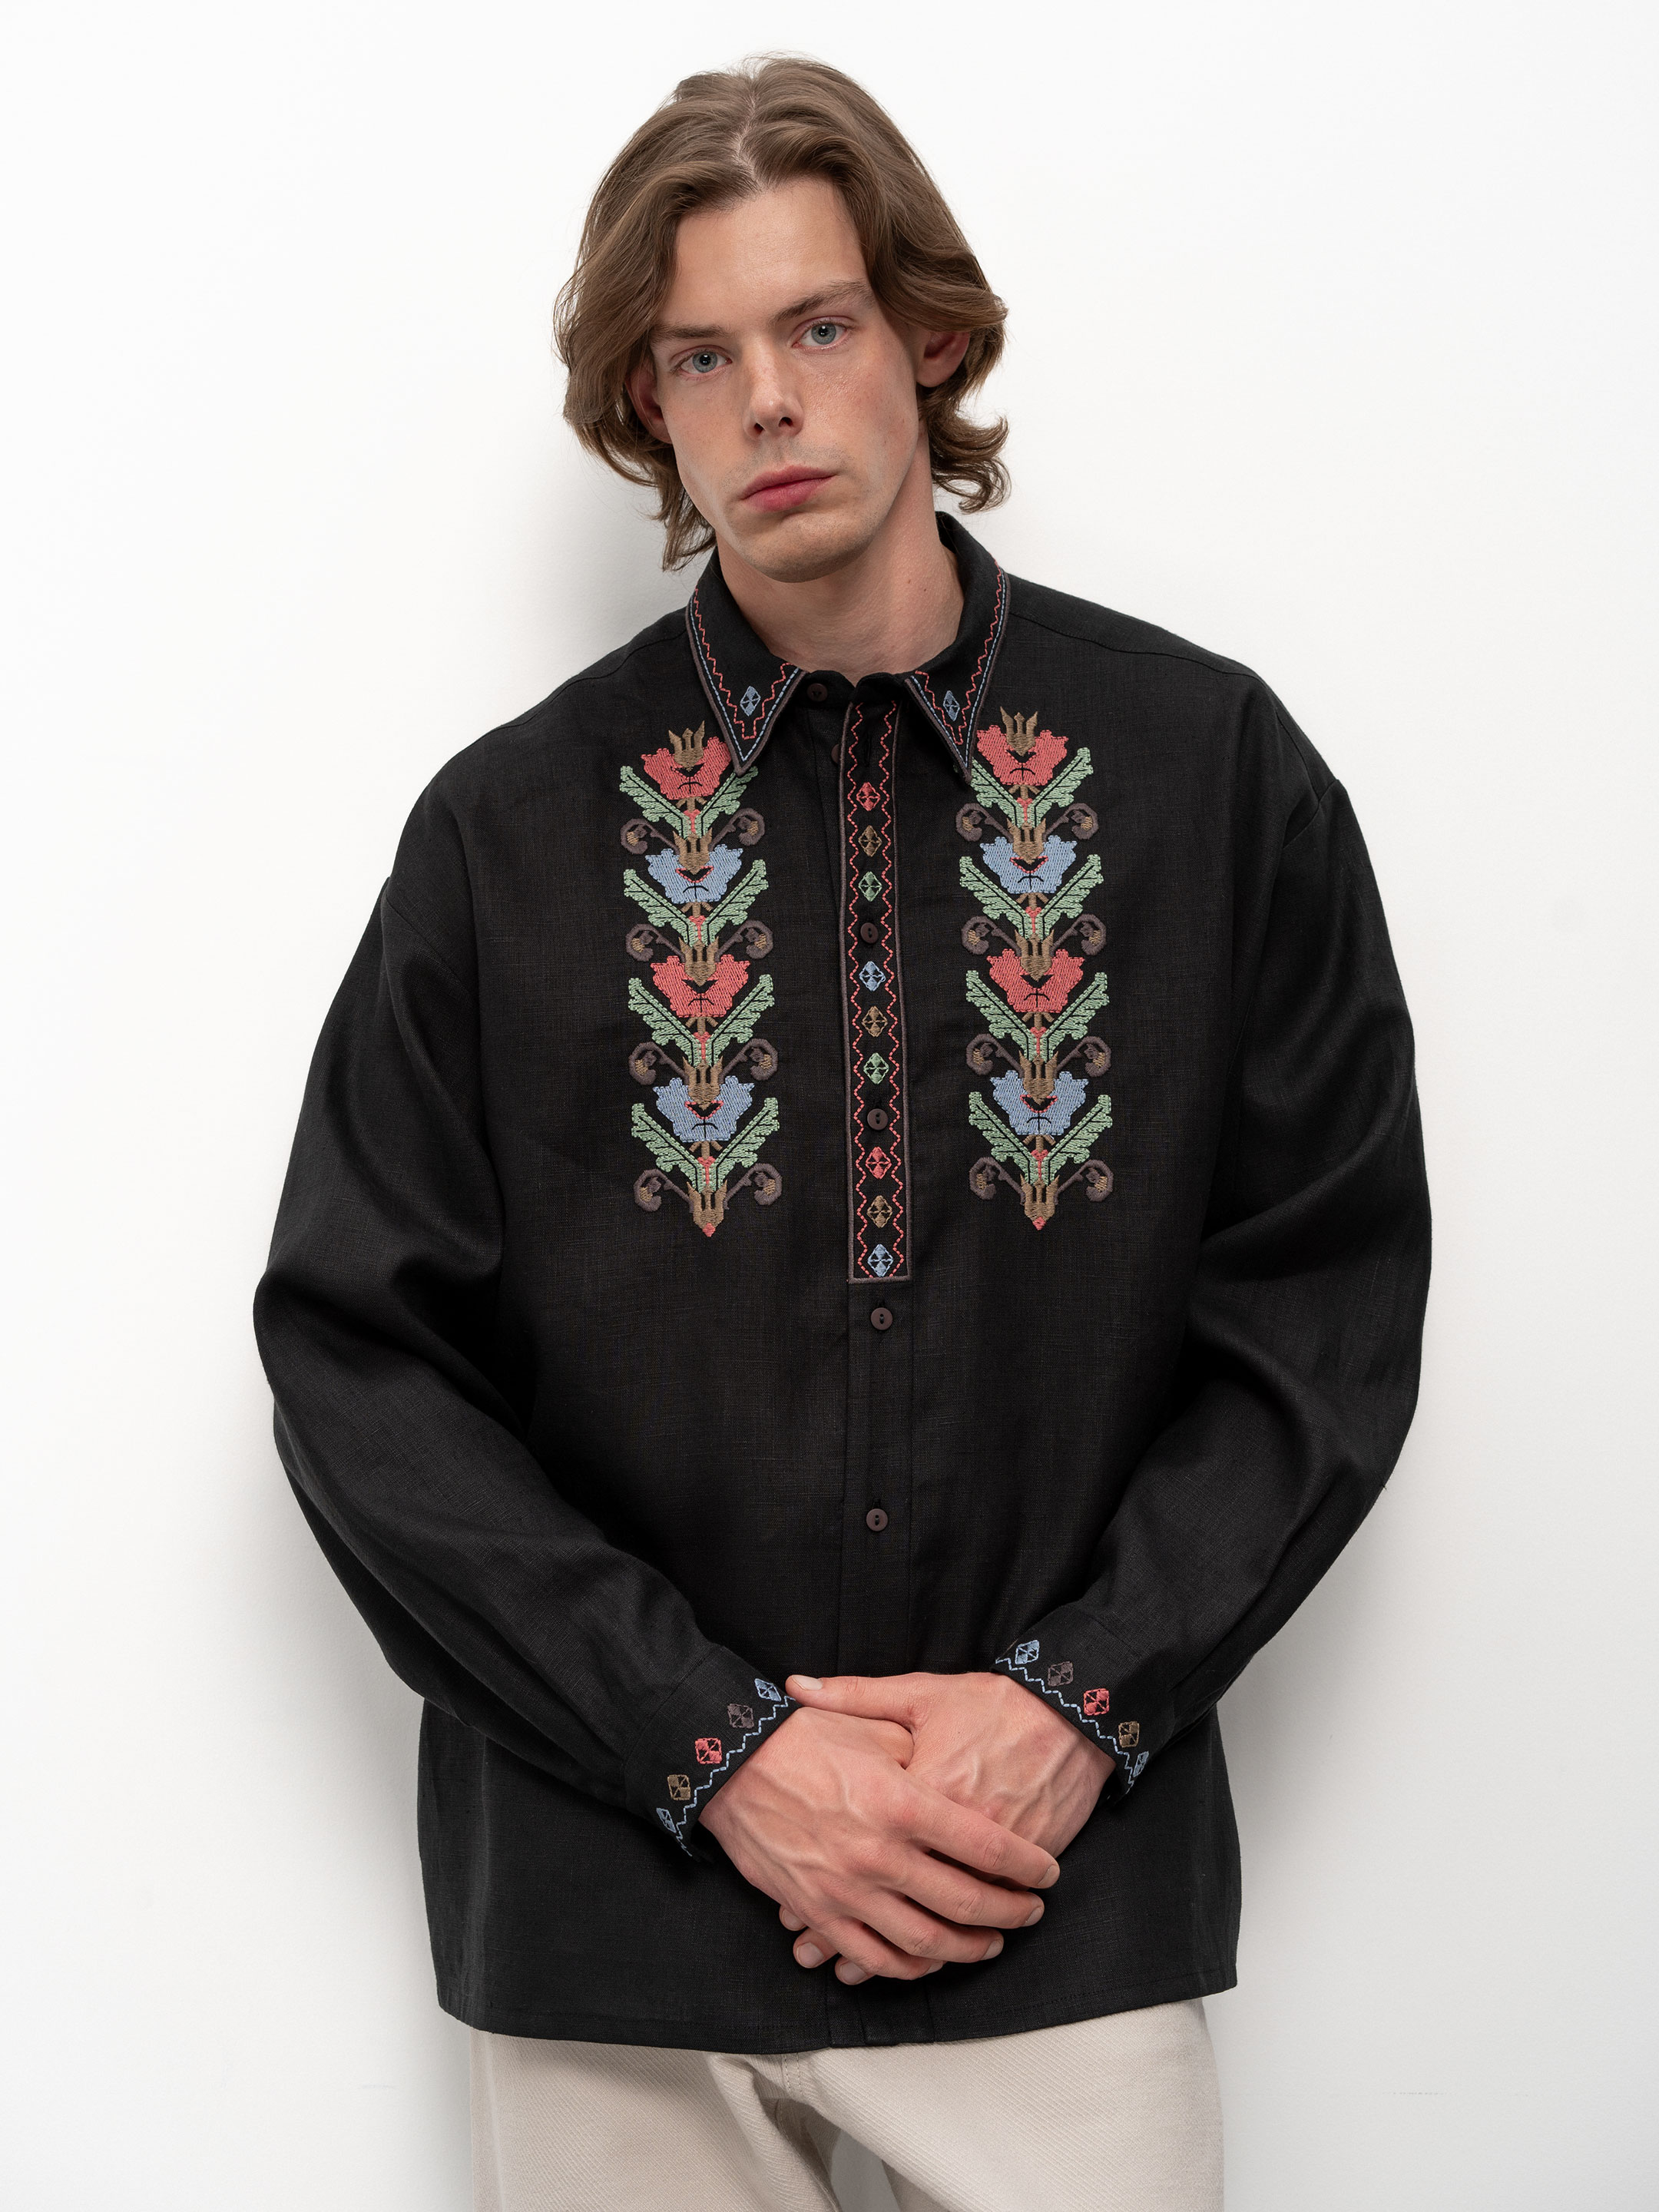 Men's embroidered shirt with a collar Kovel - photo 1